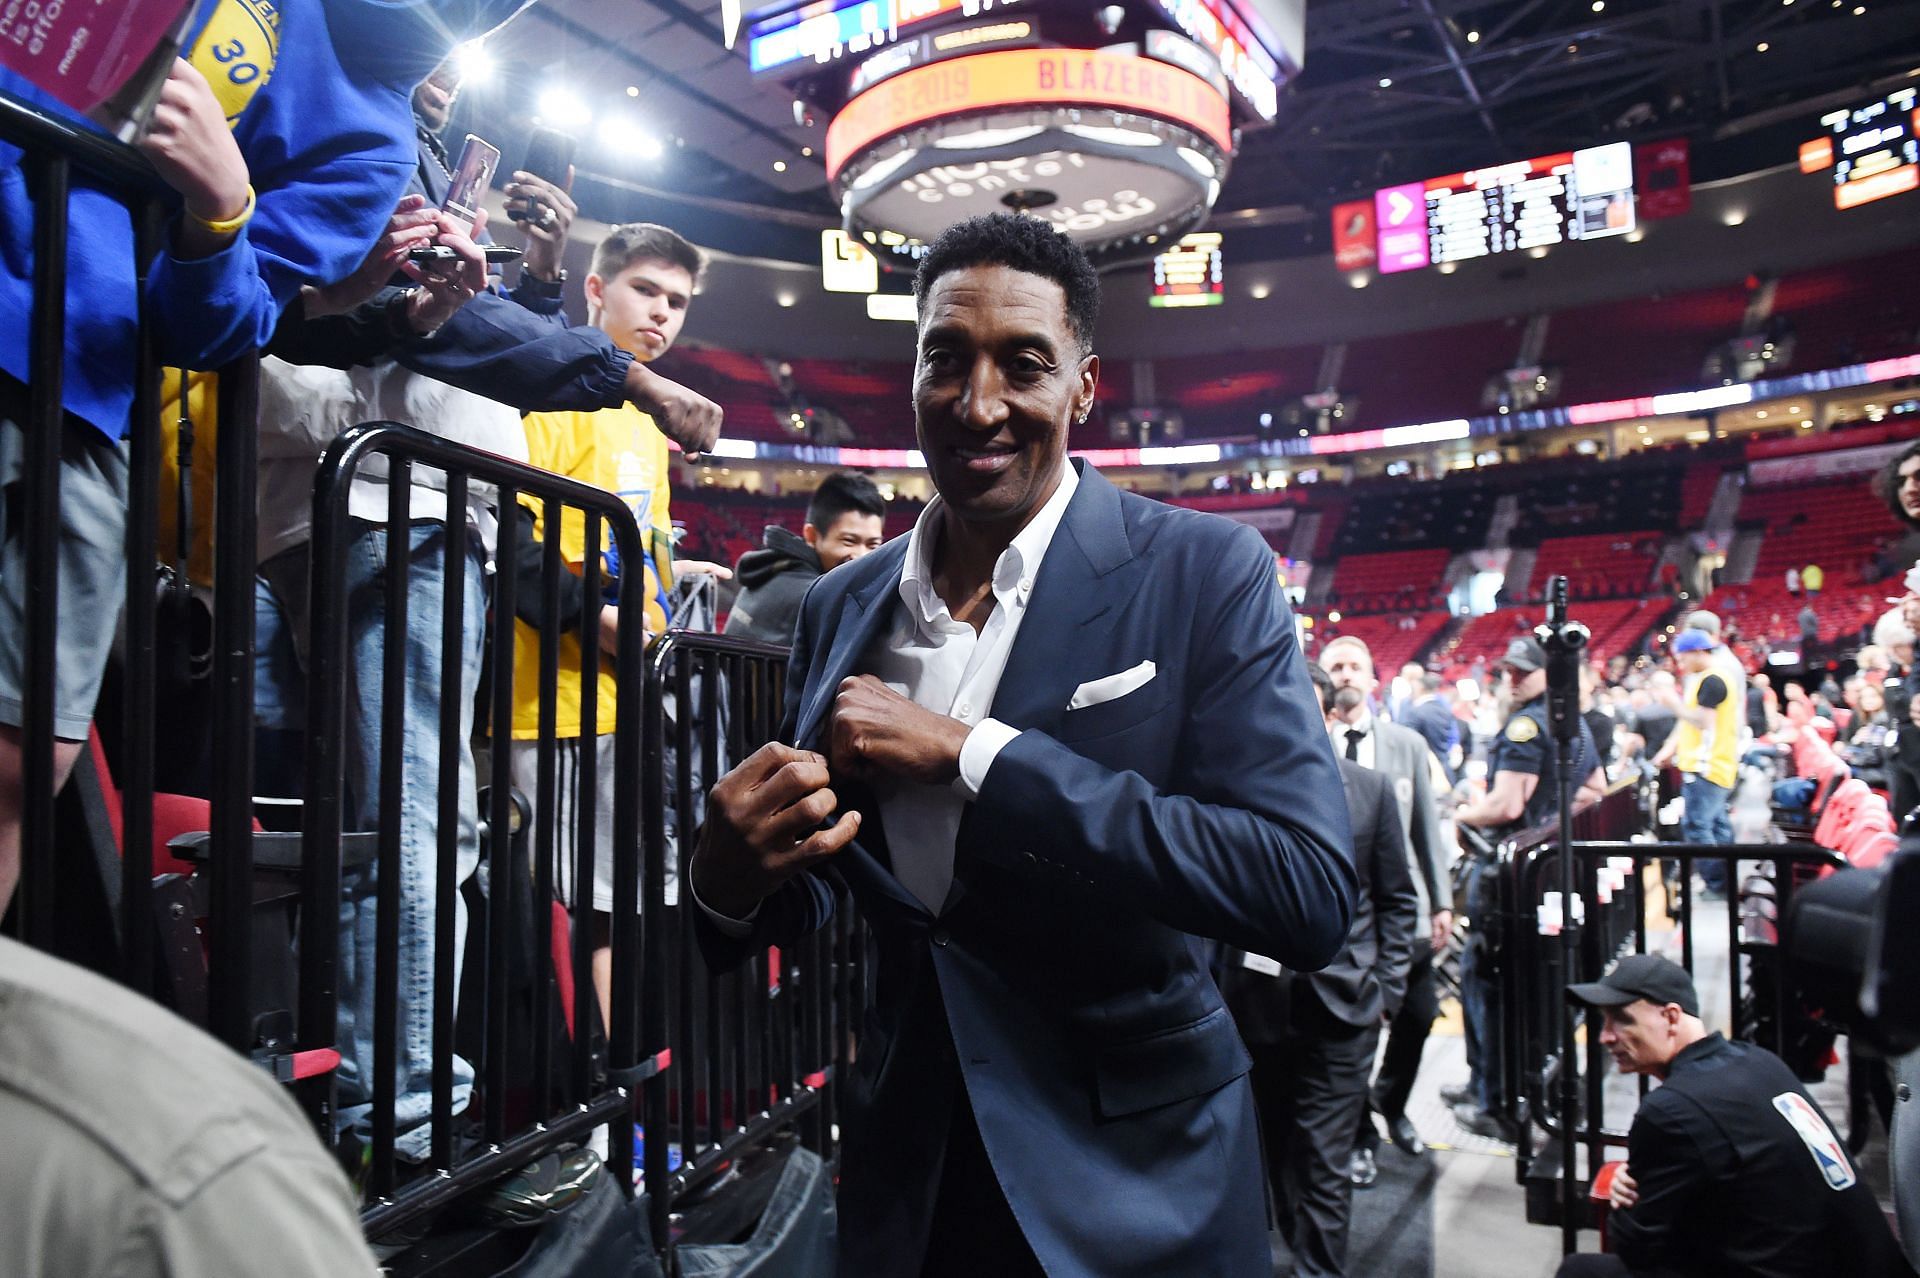 Former NBA player Scottie Pippen looks on before Game 4 of the NBA Western Conference Finals between the Golden State Warriors and the Portland Trail Blazers at Moda Center on May 20, 2019, in Portland, Oregon.